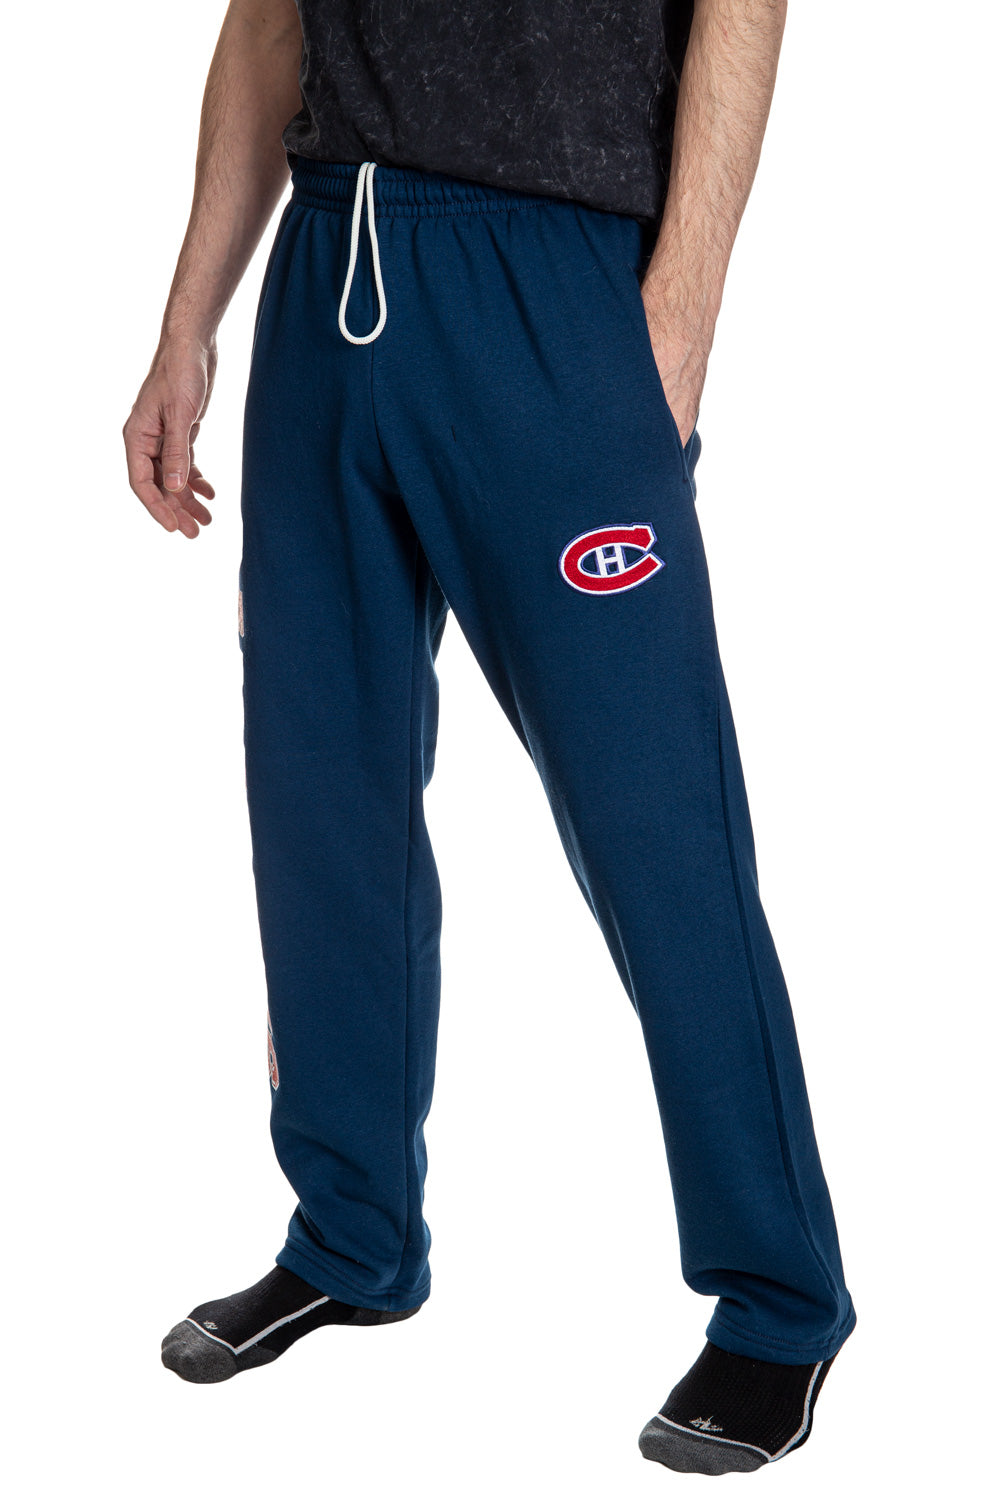 Montreal Canadiens Premium Fleece Sweatpants Side View of Embroidered Logo.